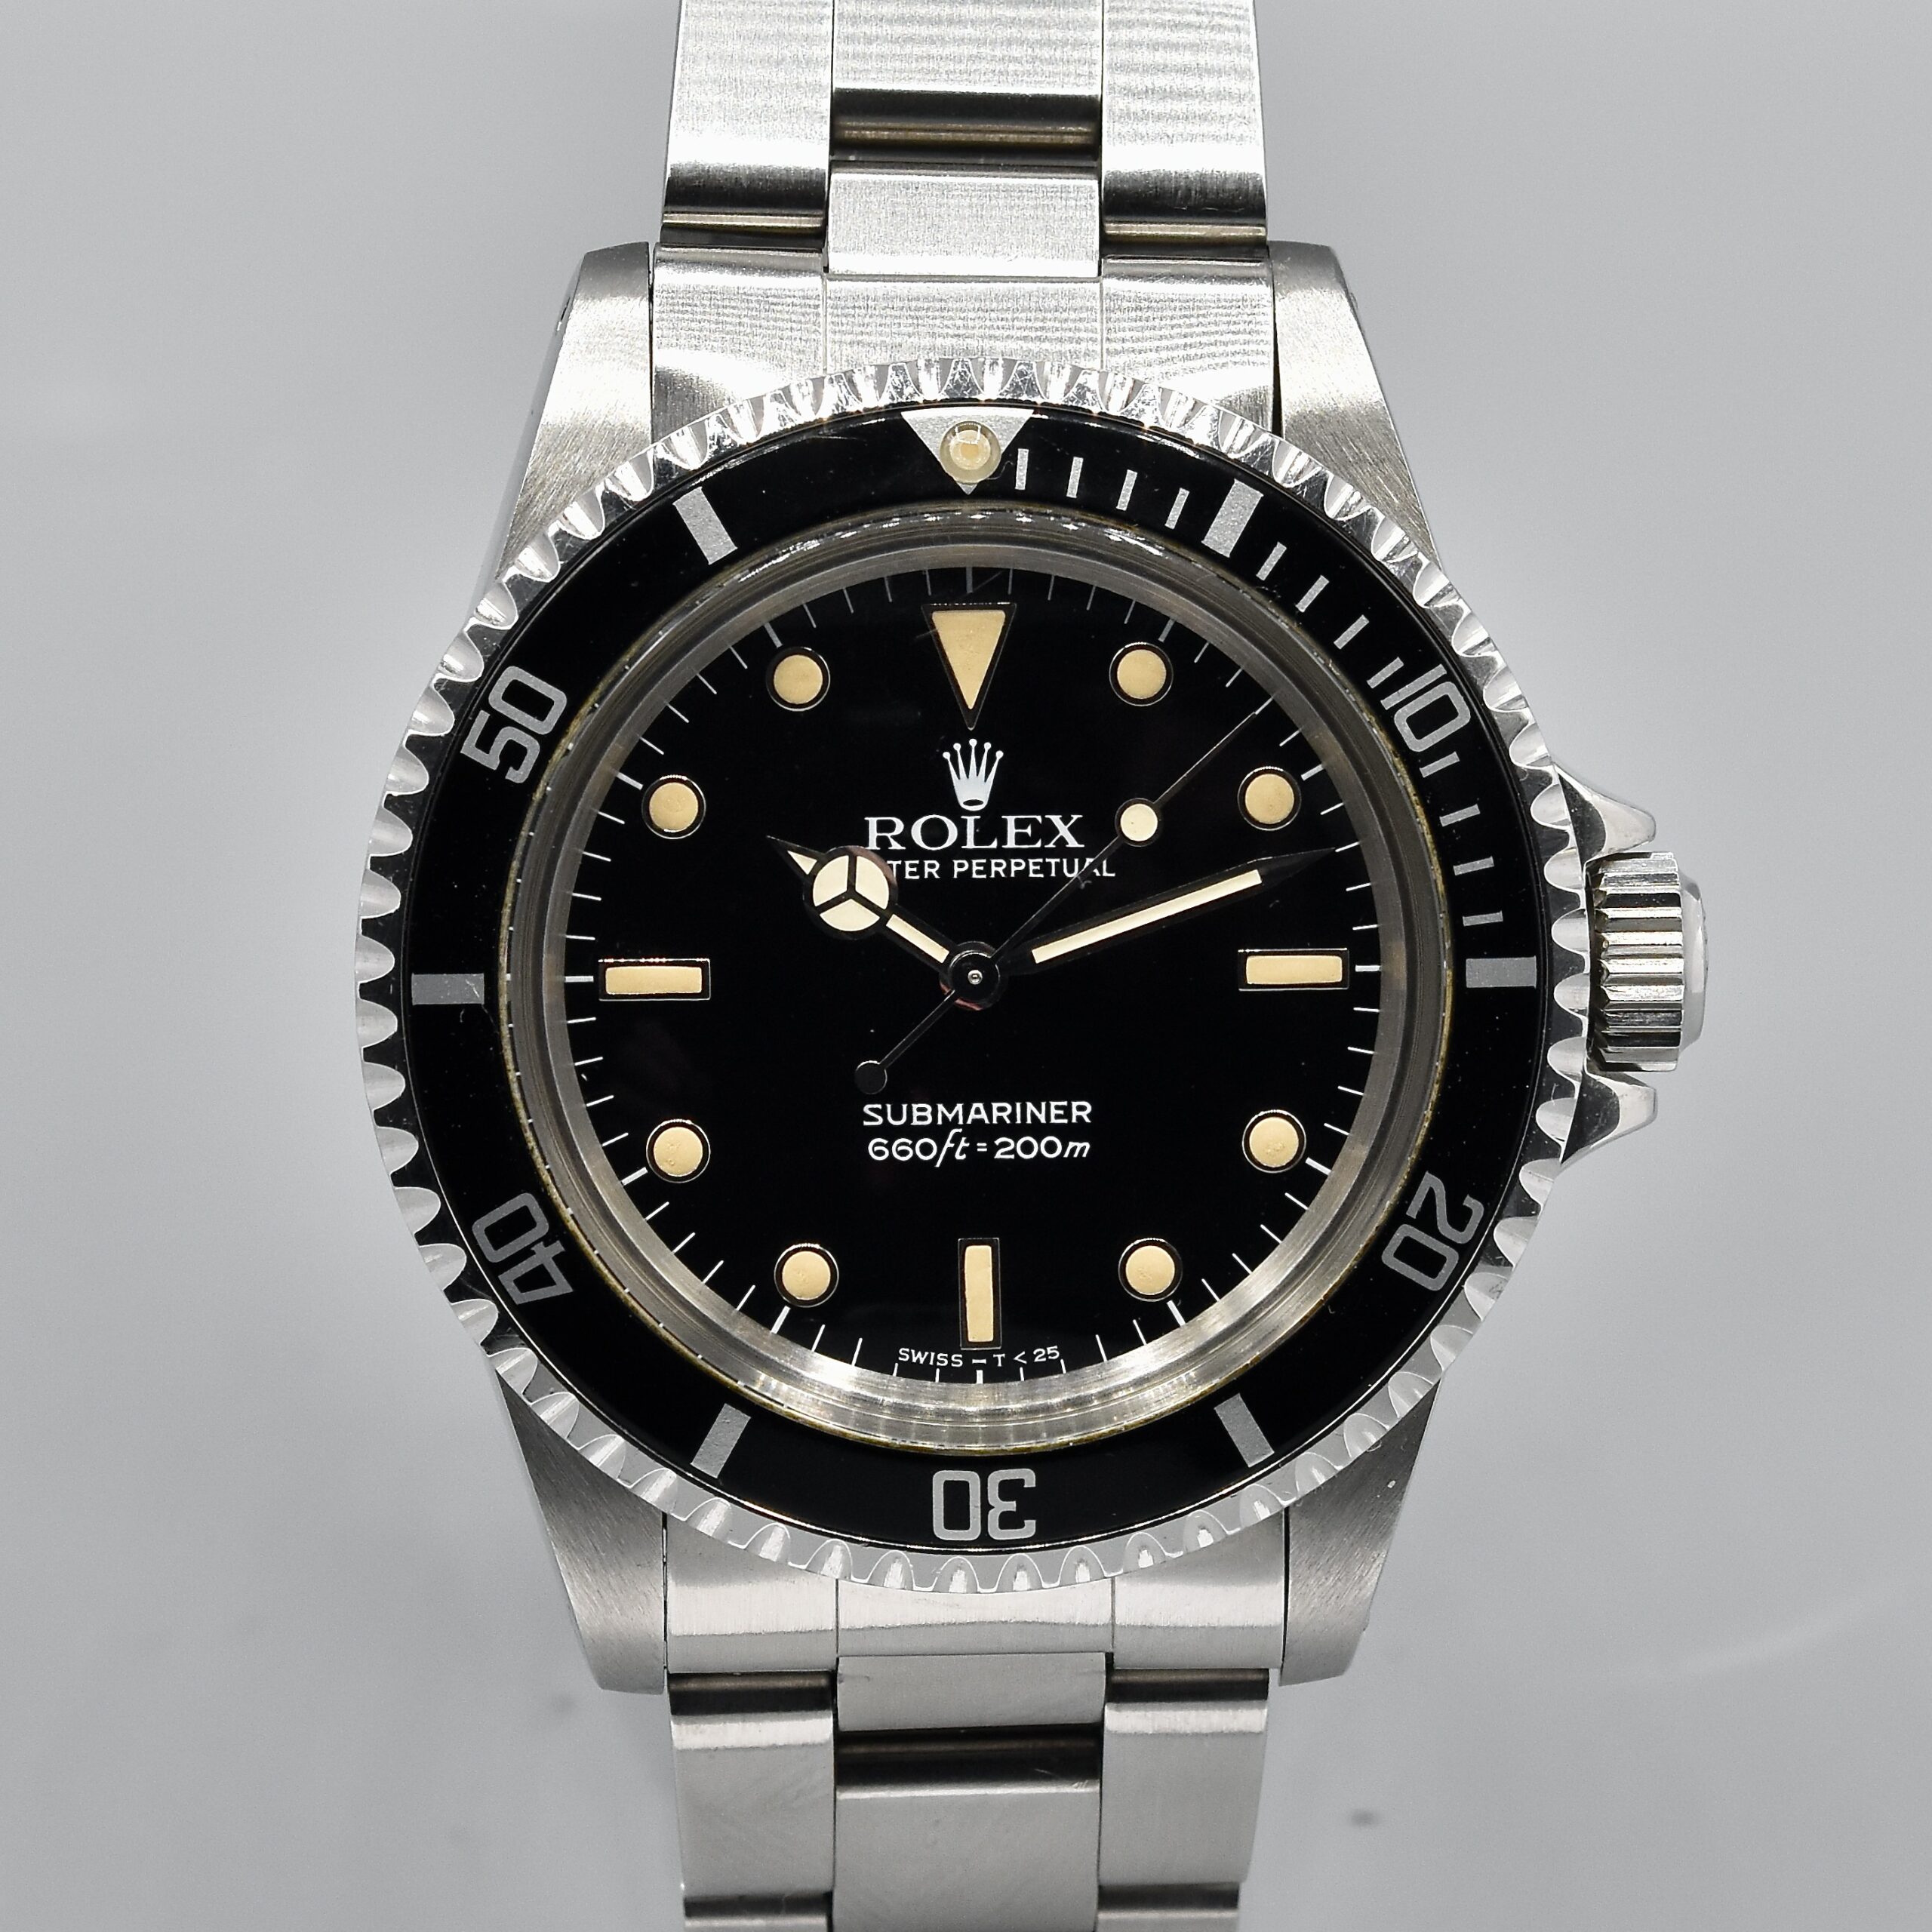 ROLEX SUBMARINER REF. 5513 WITH PAPERS